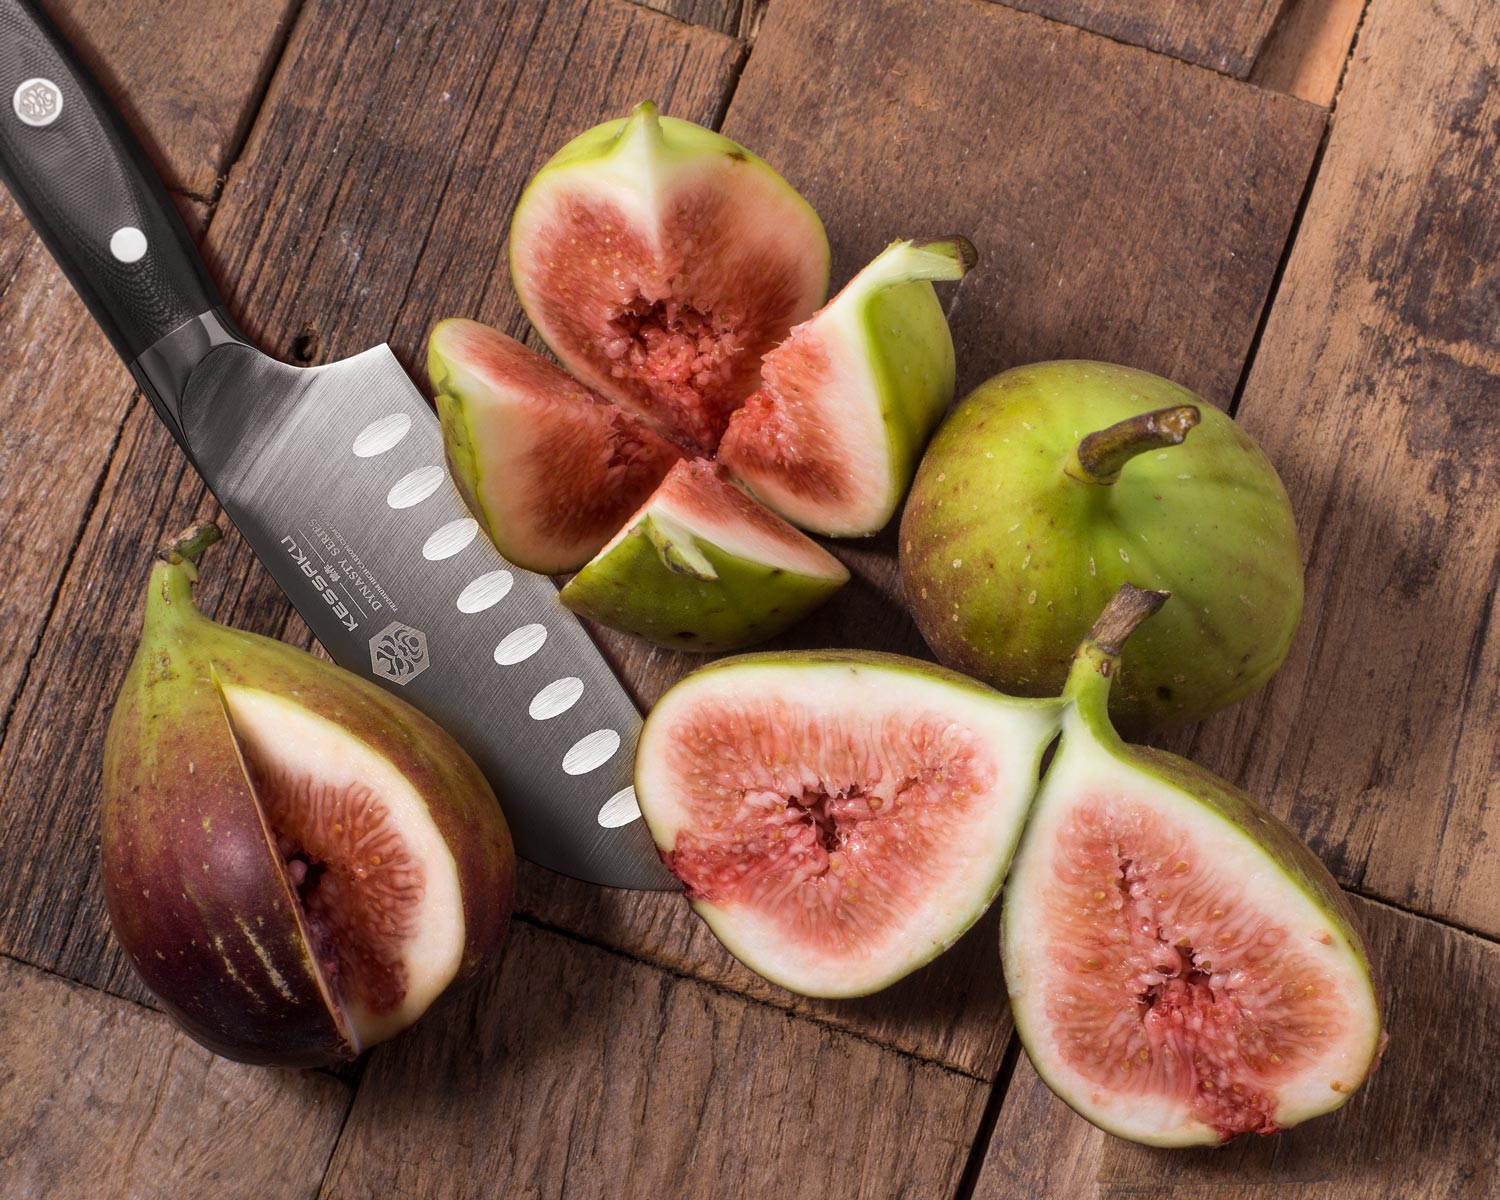 View the Dynasty Series line of kitchen knives and utensils.